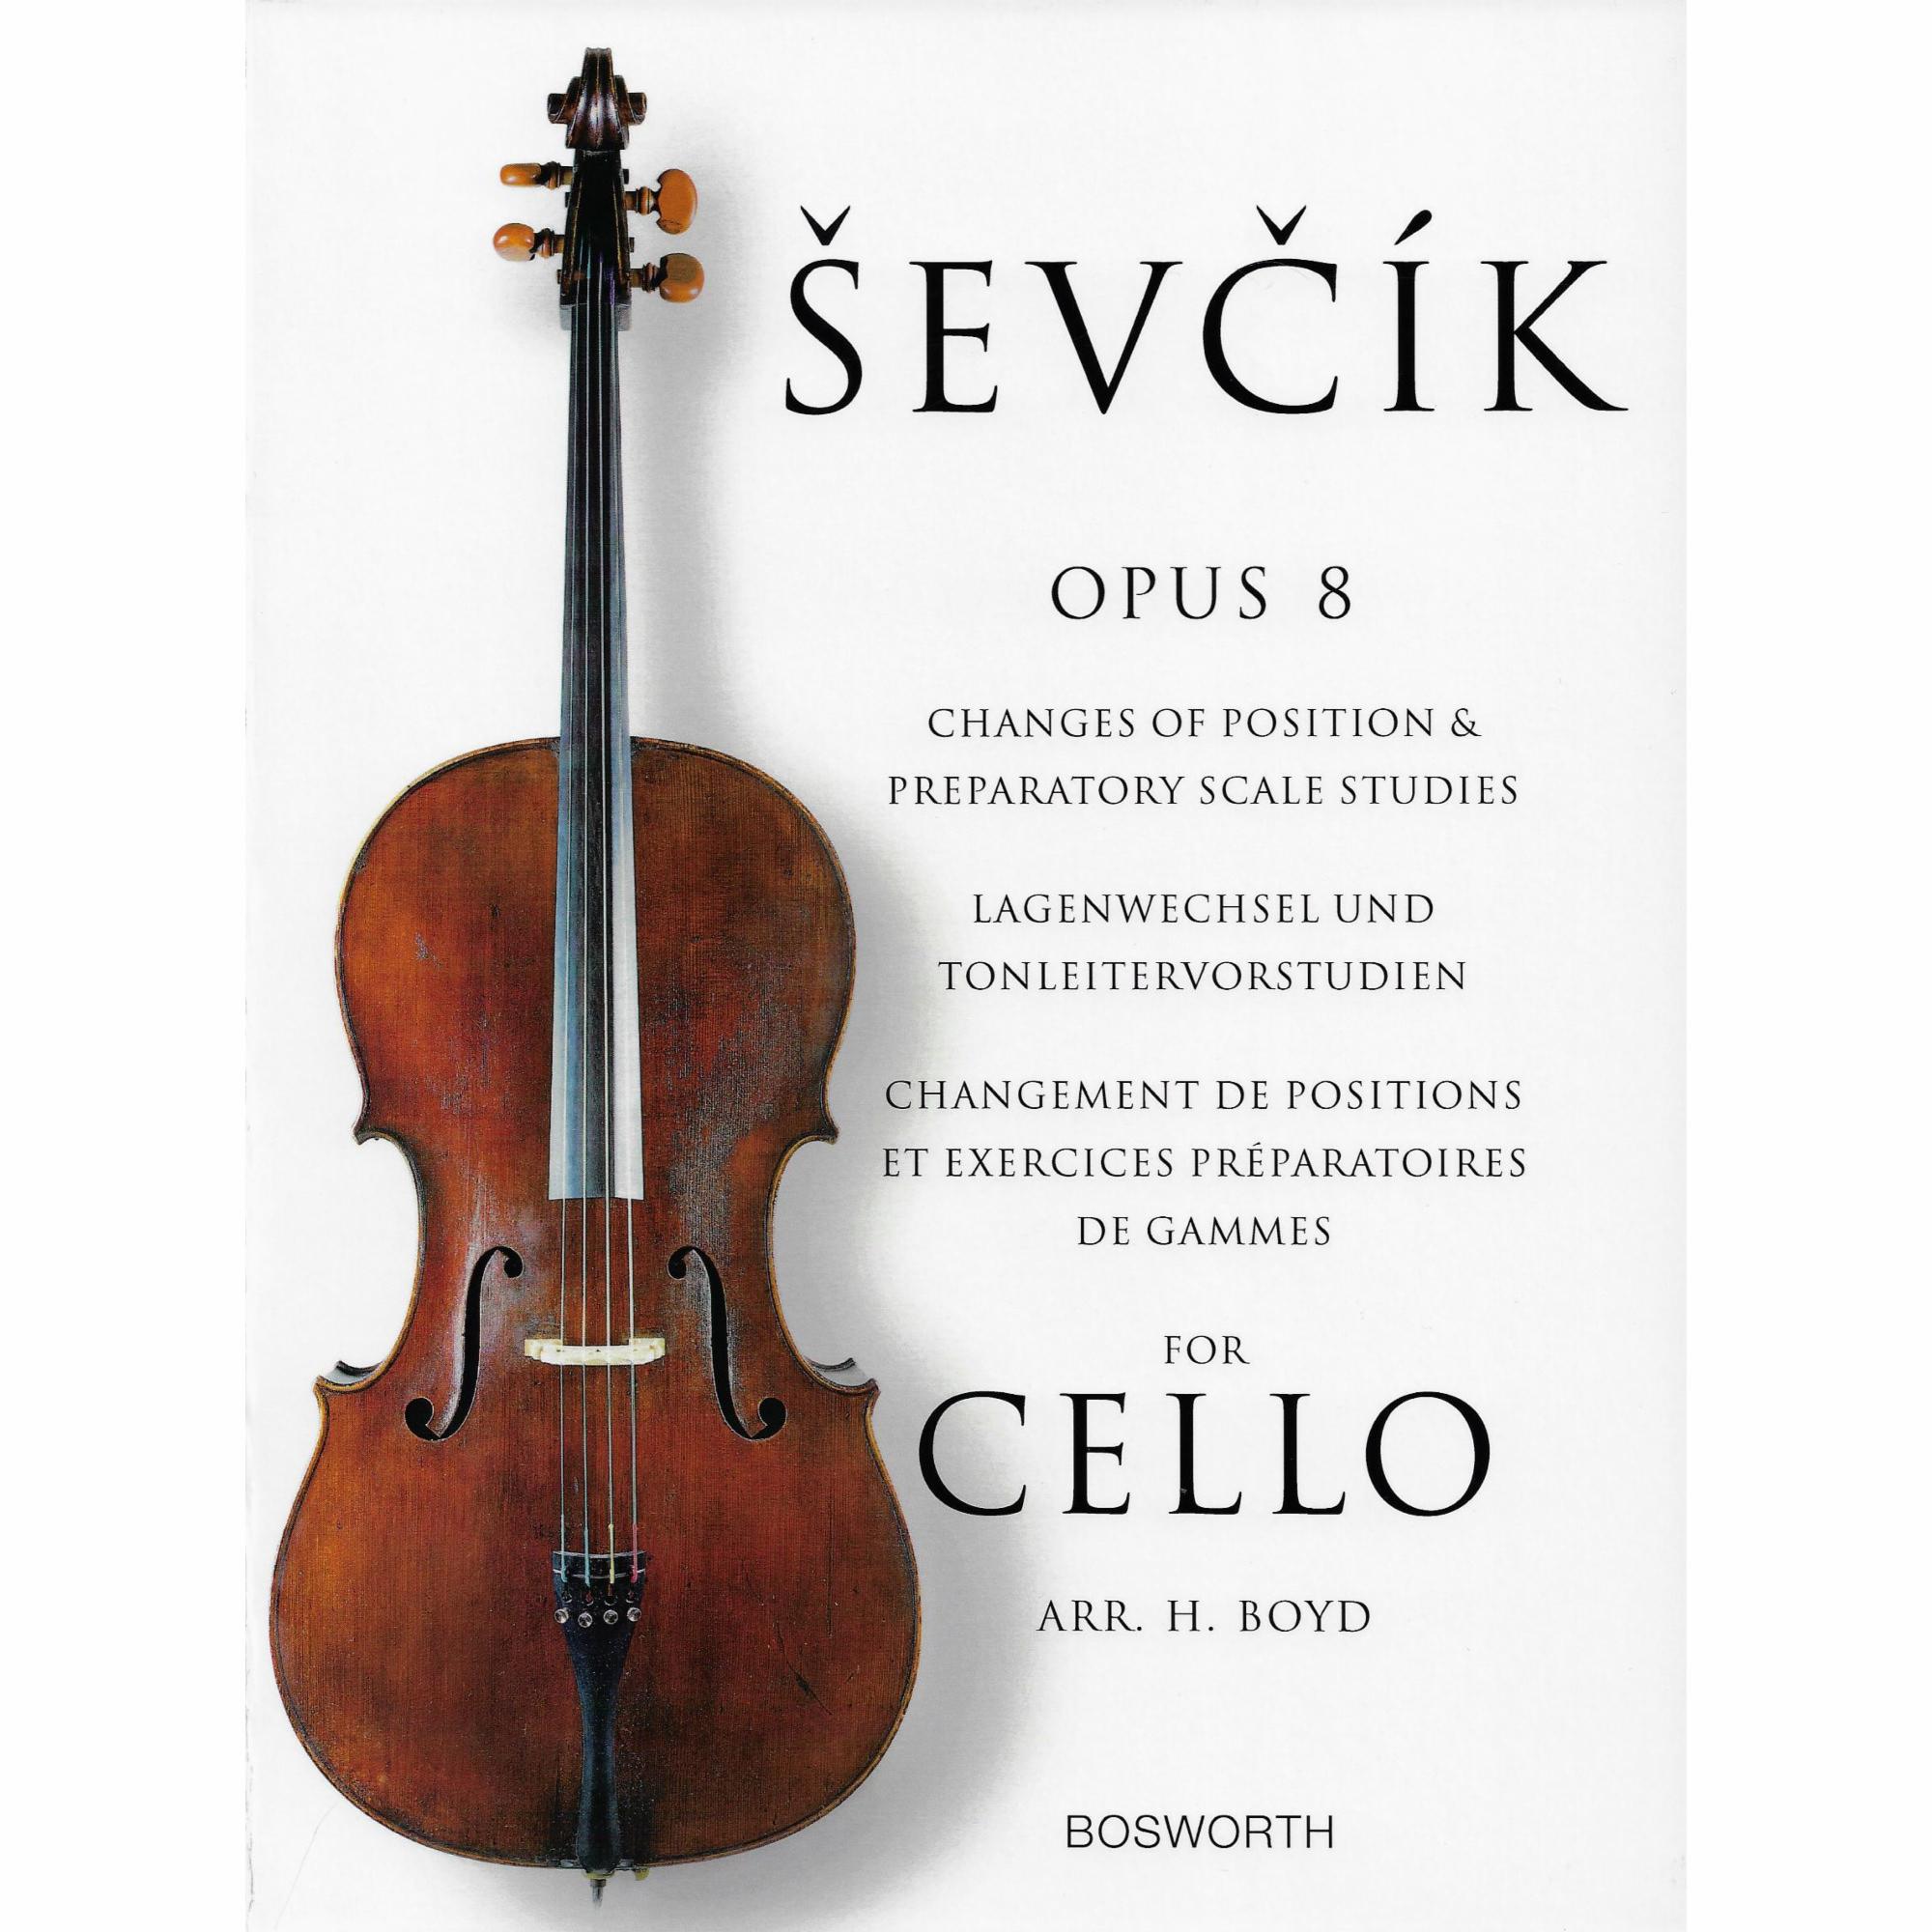 Sevcik -- Changes of Position & Preparatory Scales Studies, Op. 8 for Cello